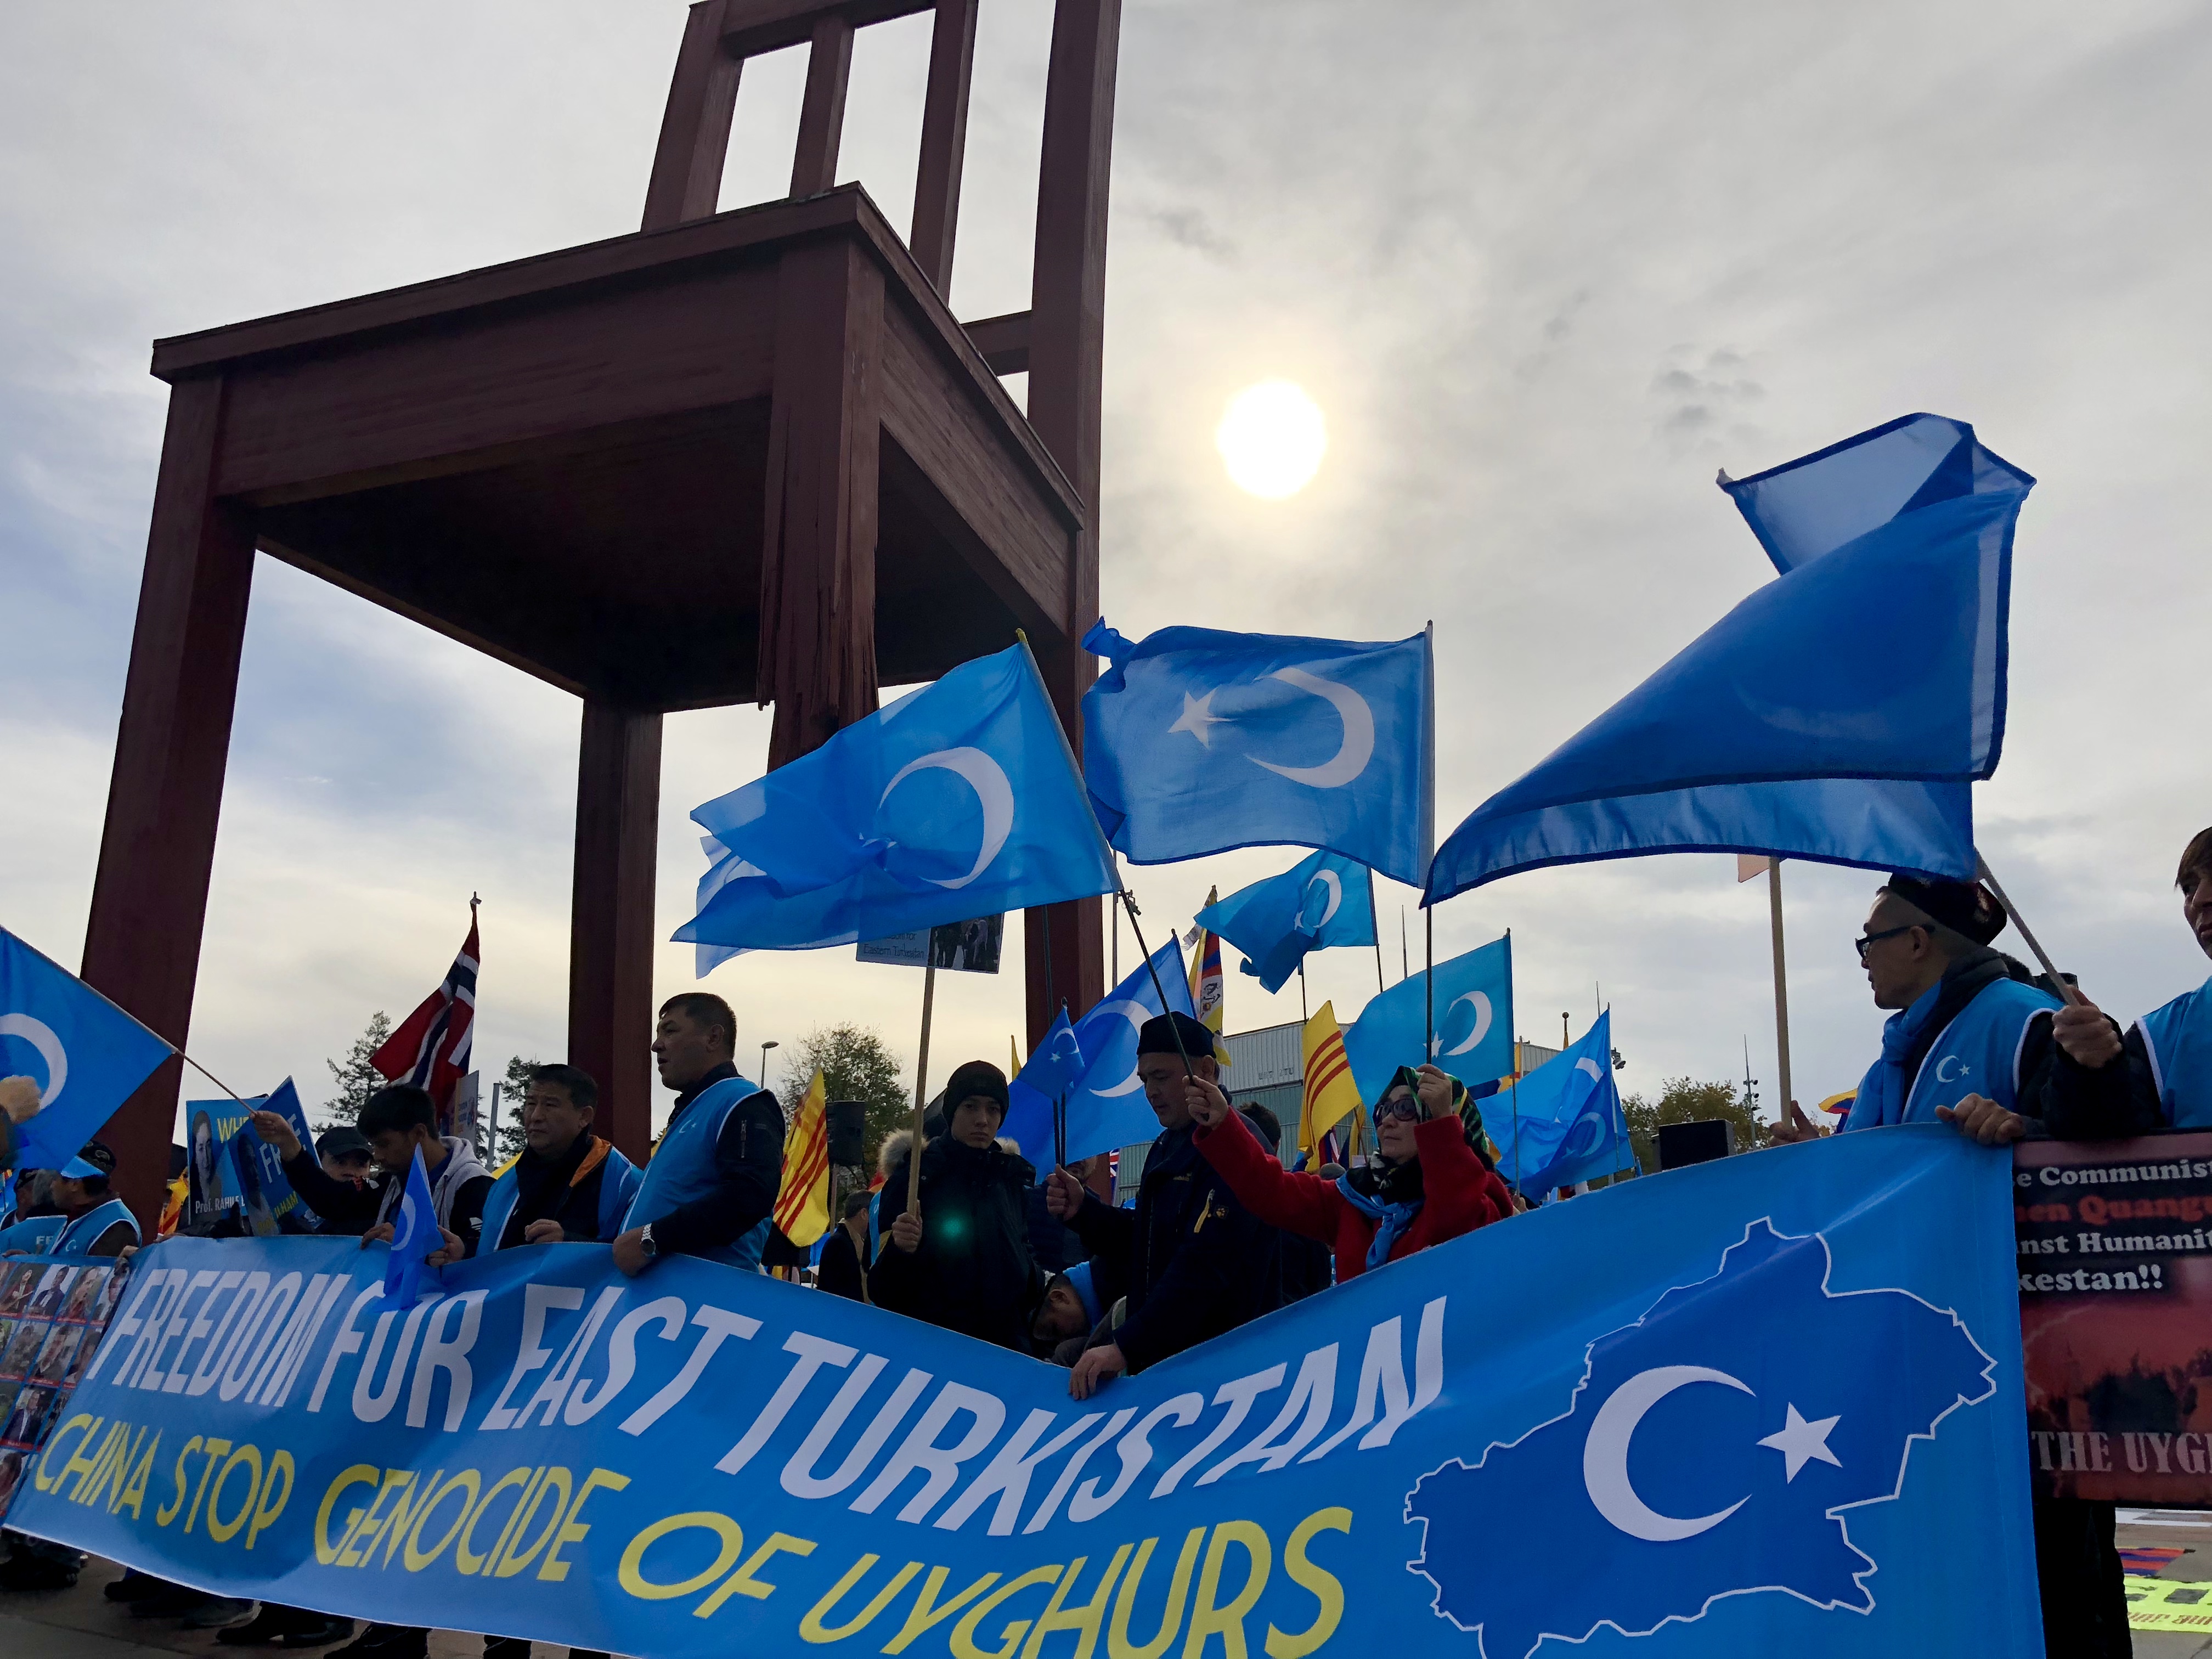 Event Announcement: Repressed, Detained and Disappeared: Uyghur Human Rights Crisis